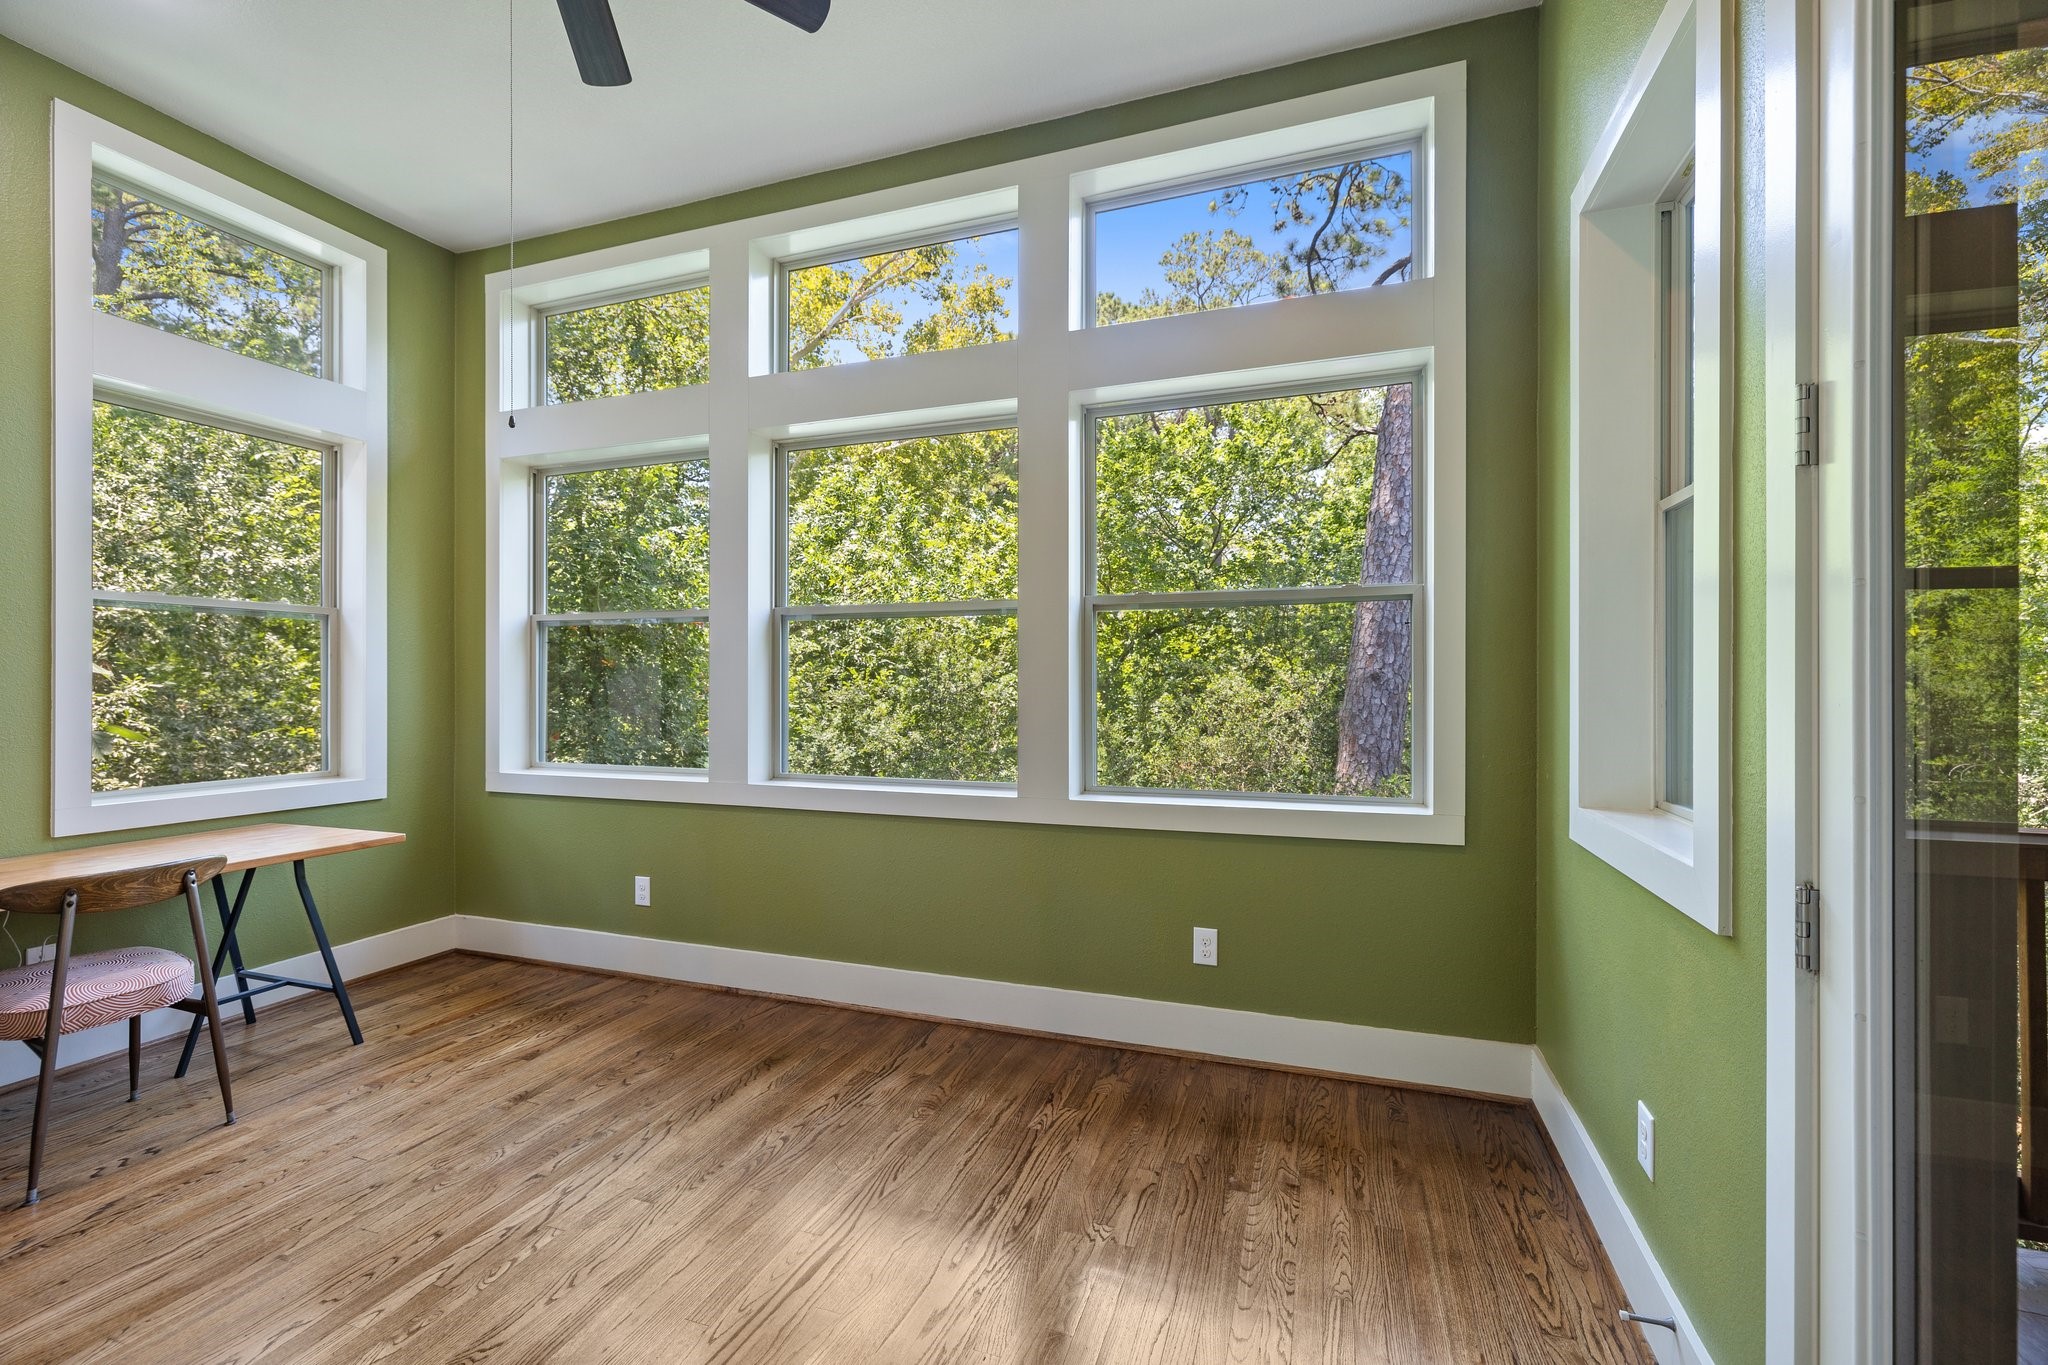 Adjacent to the primary suite, a private large sitting/flex room would make the ideal yoga, art or crafting space. Massive wrap around windows offer amazing views.